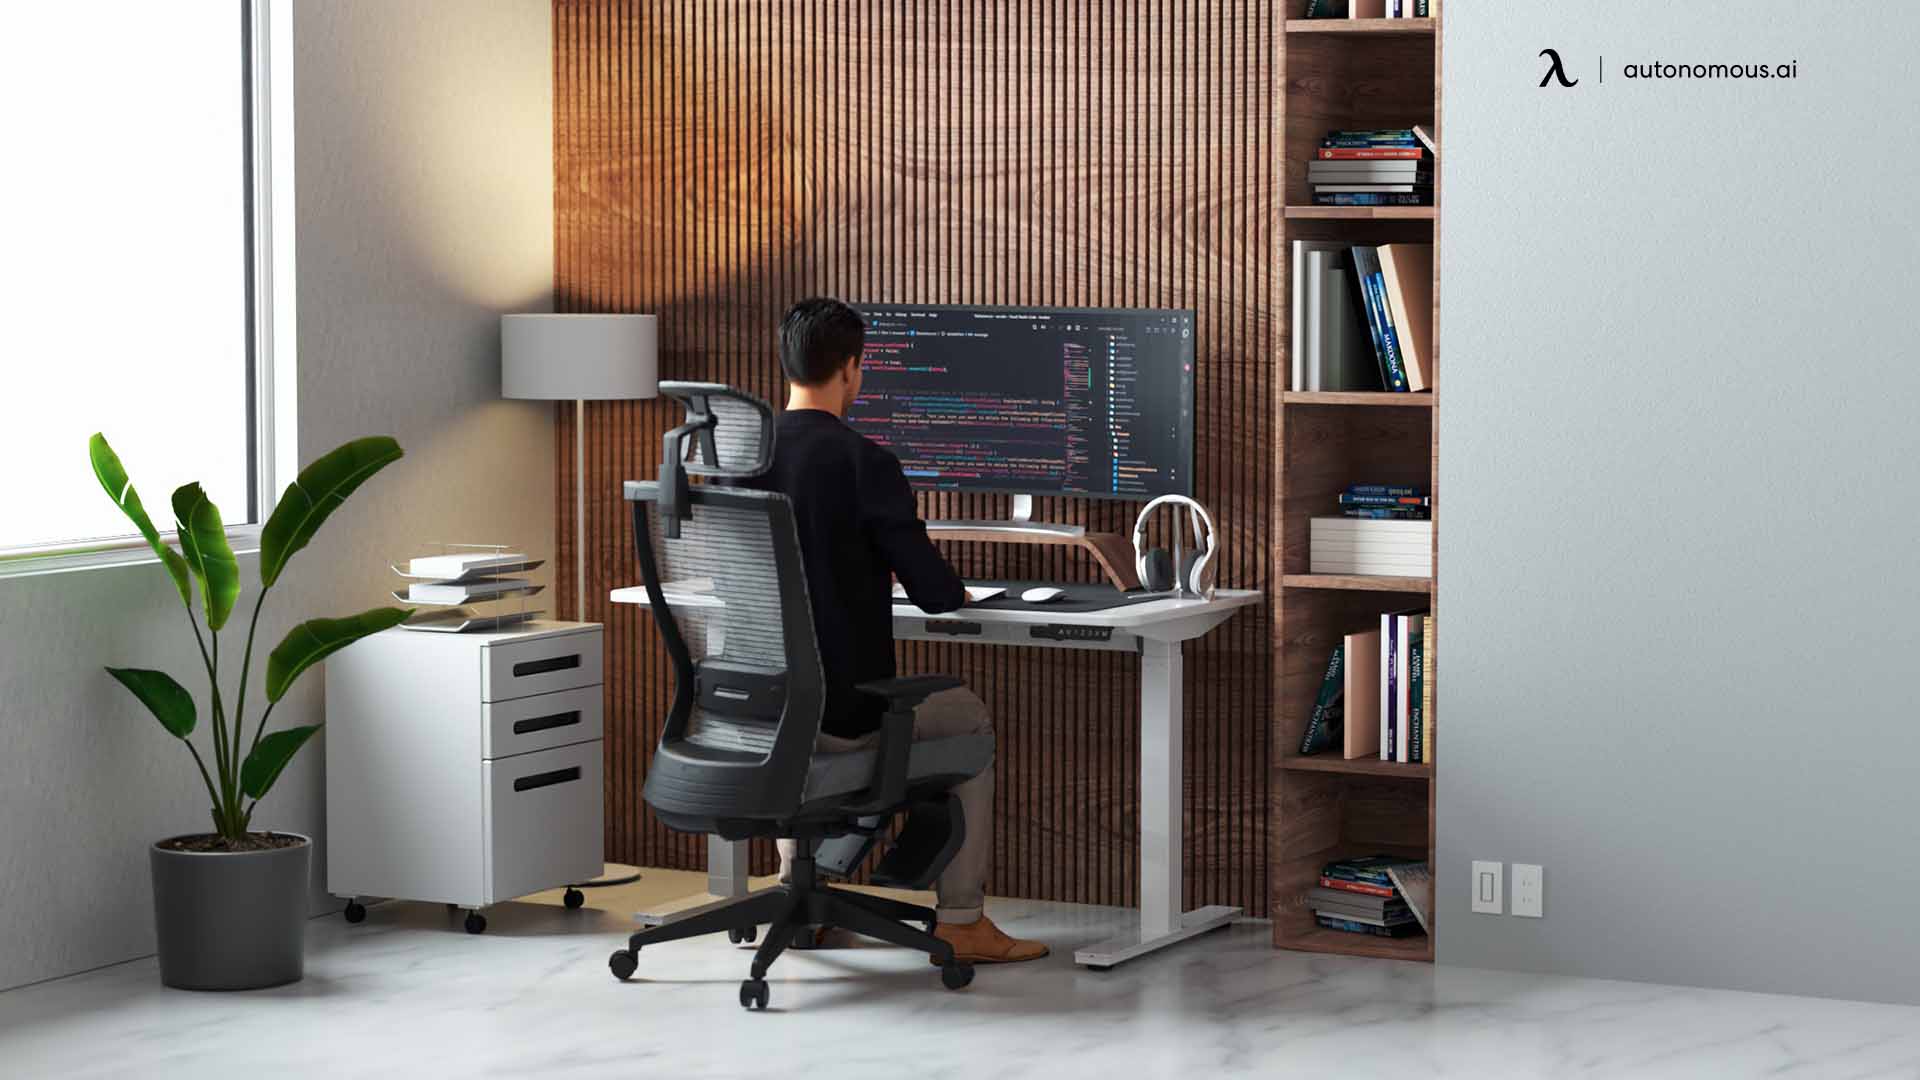 Placing your home office desk against a wall is a popular choice